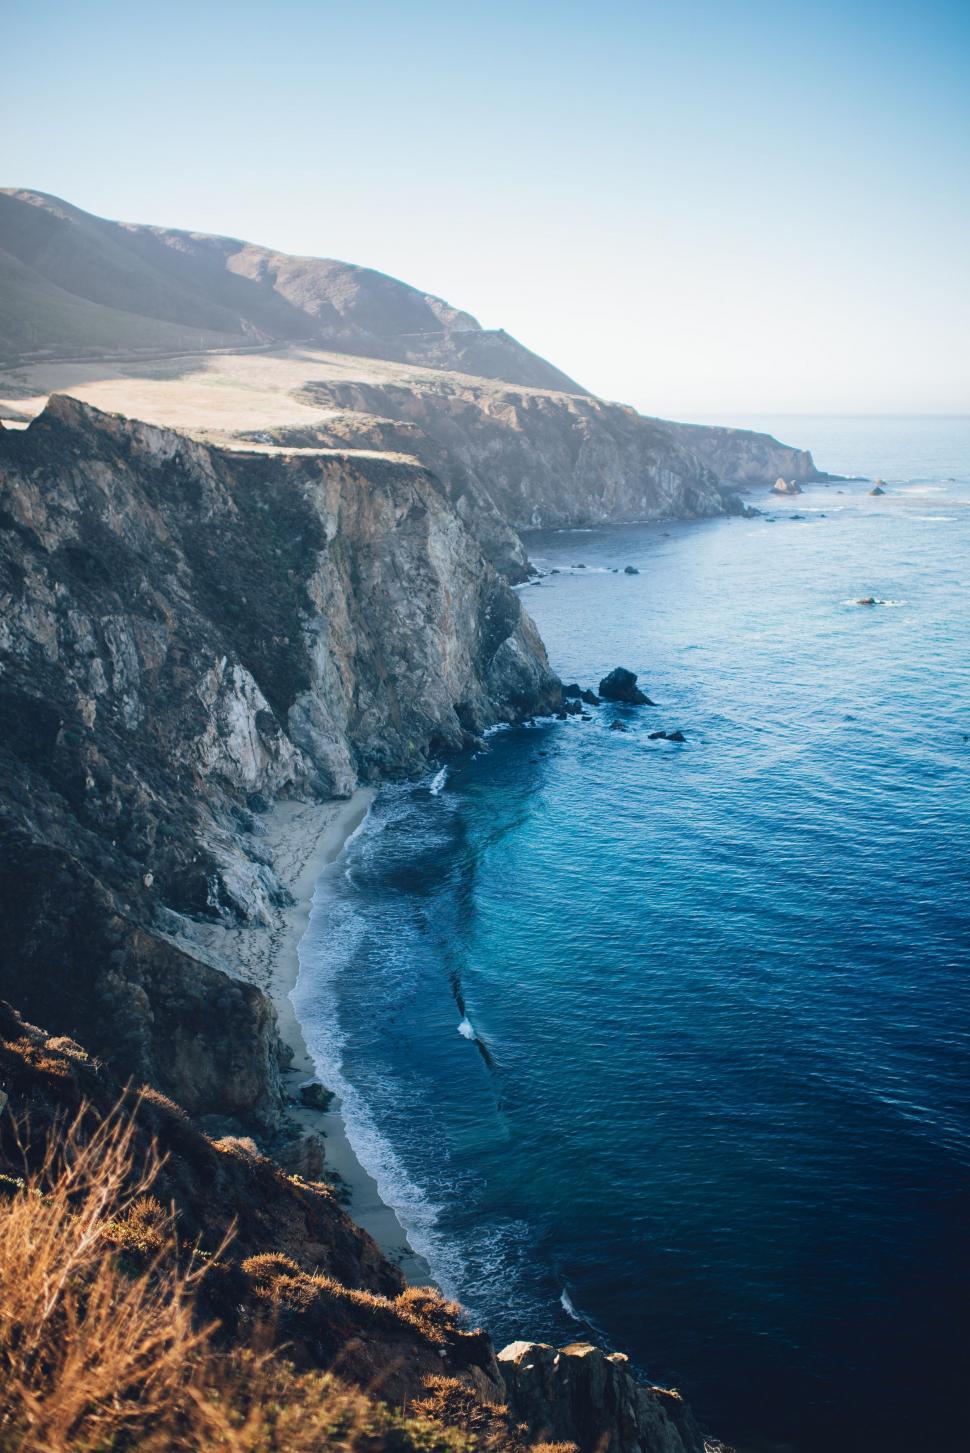 Free Image of A Spectacular View of the Ocean From a Cliff 